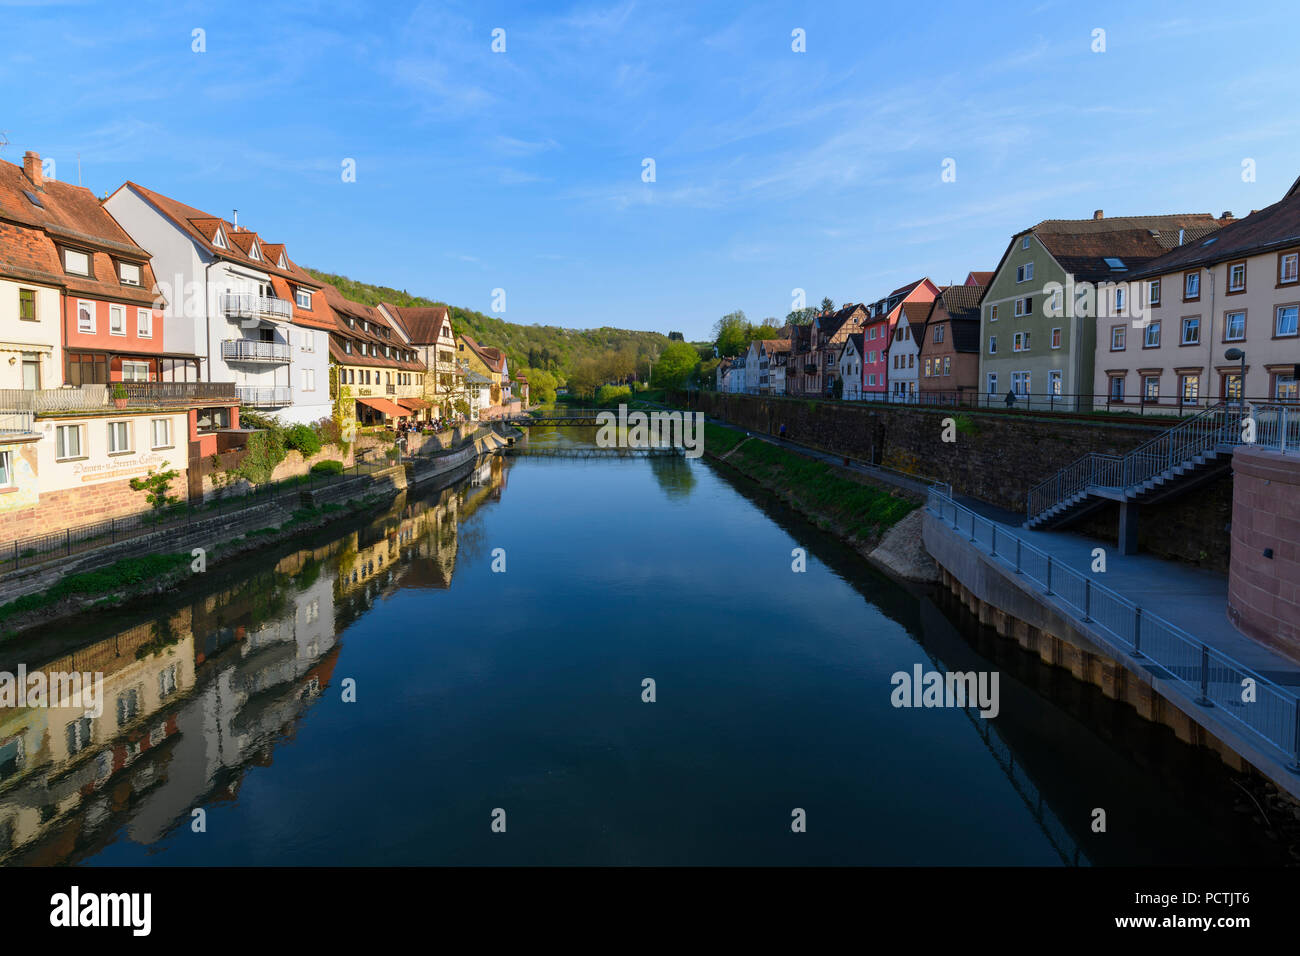 Tauber river with colorful fisher houses, Wertheim, River Tauber, Tauberfranken, Spessart, Franconia, Main-Tauber-district, Baden-Württemberg, Germany Stock Photo